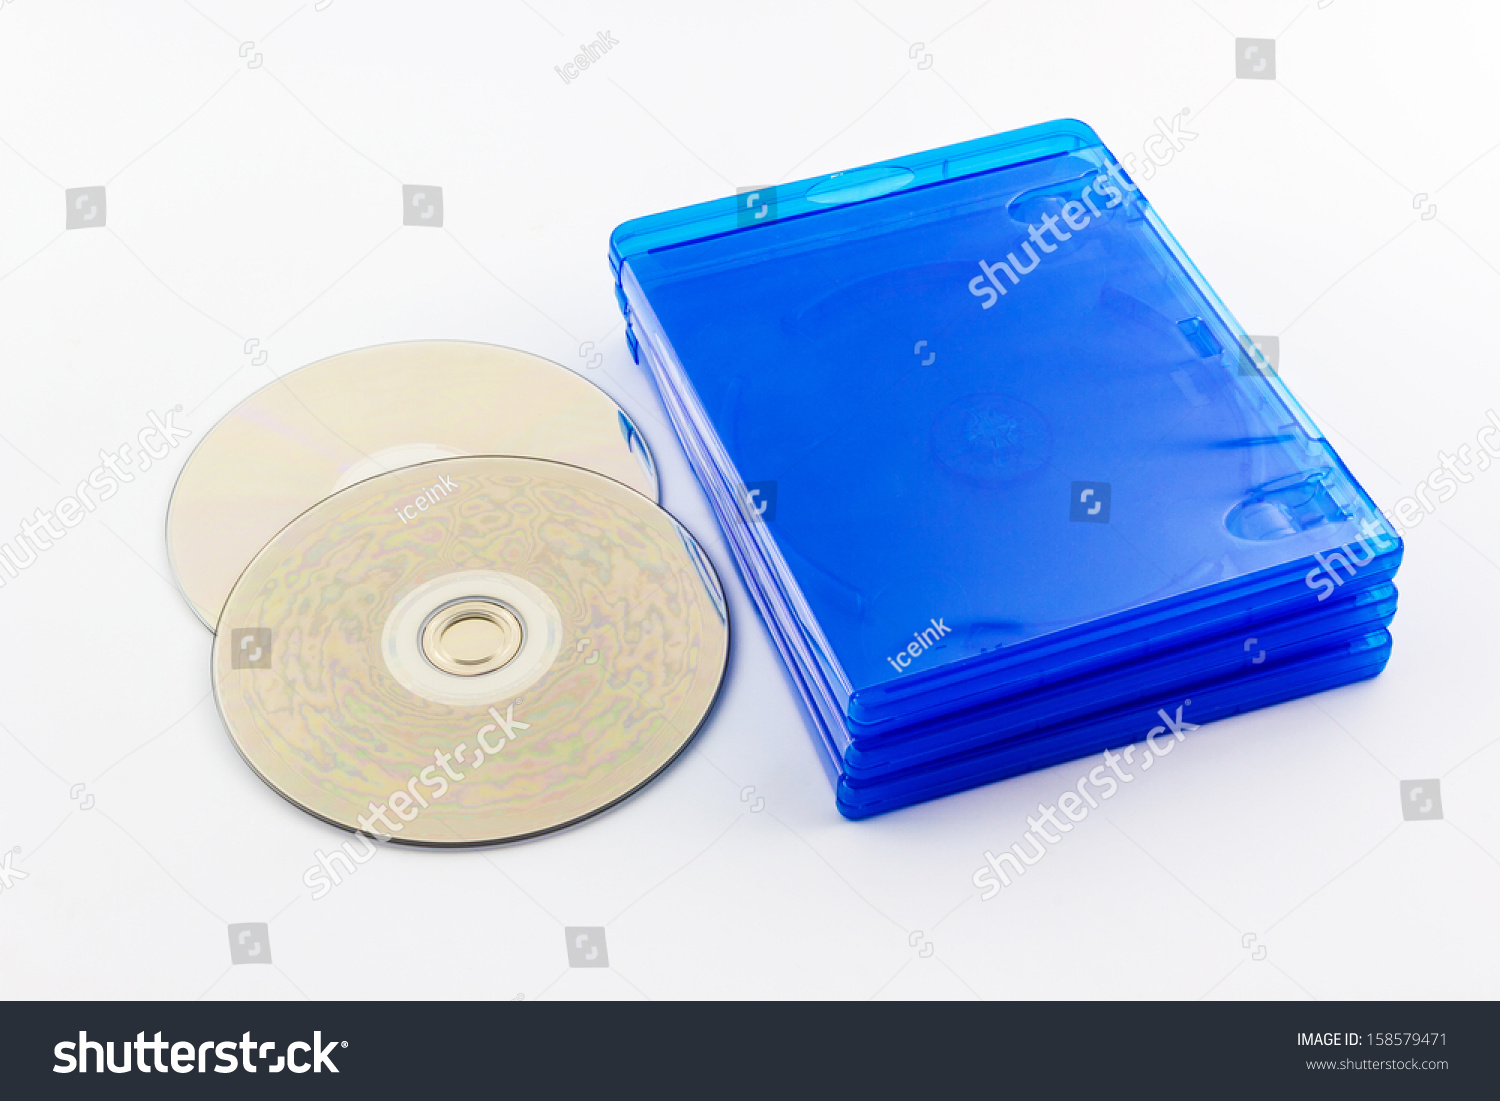 Blu Ray Disc Boxes And Blu Ray Disc Isolated On White Background. Stock